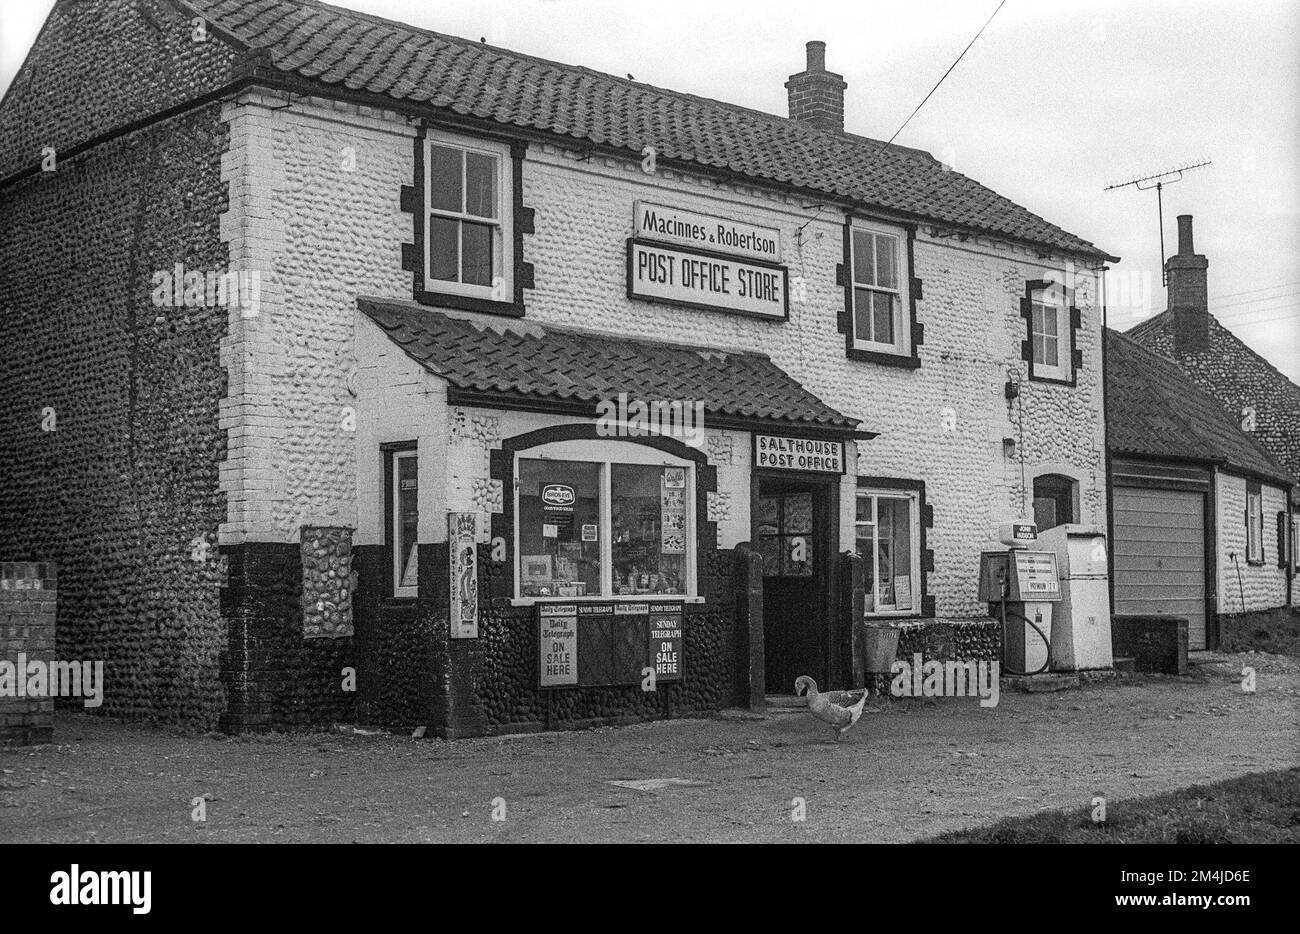 1975 archive photograph of the Post Office and Store at Salthouse on the North Norfolk coast.  The Post Office is now (2022) closed and has become the Old Post Office Shop and Deli. Stock Photo